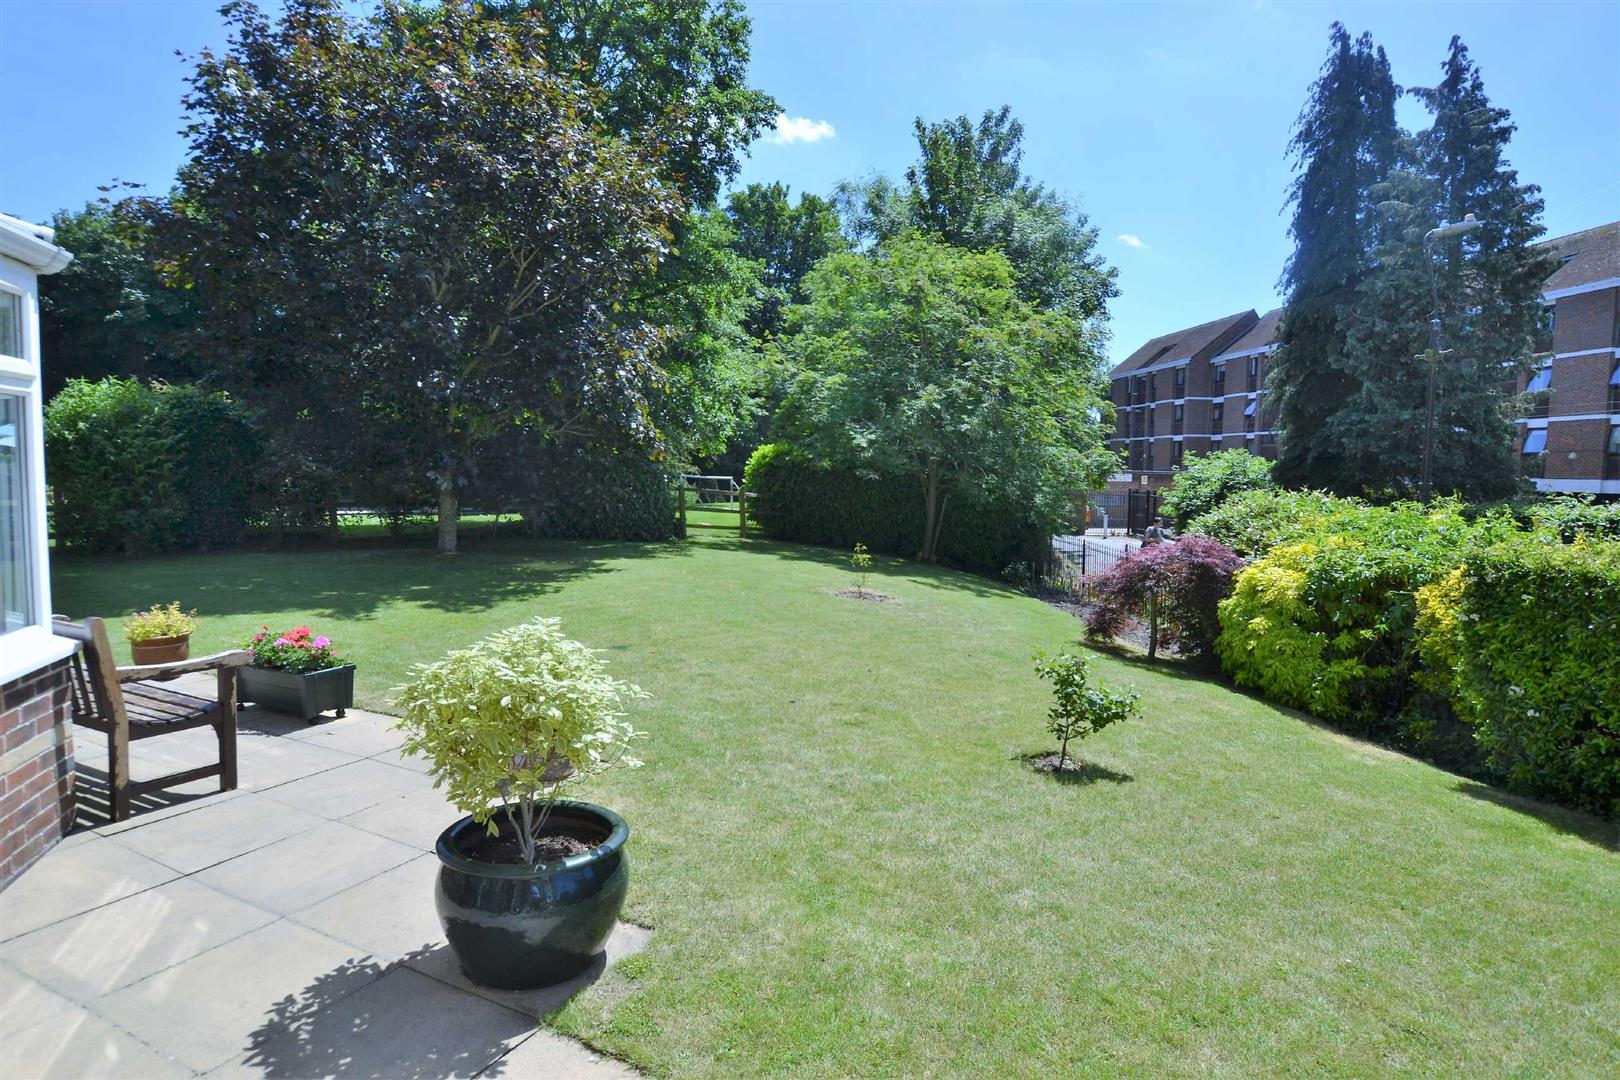 Abbotsmead Place Caversham house for sale in Reading